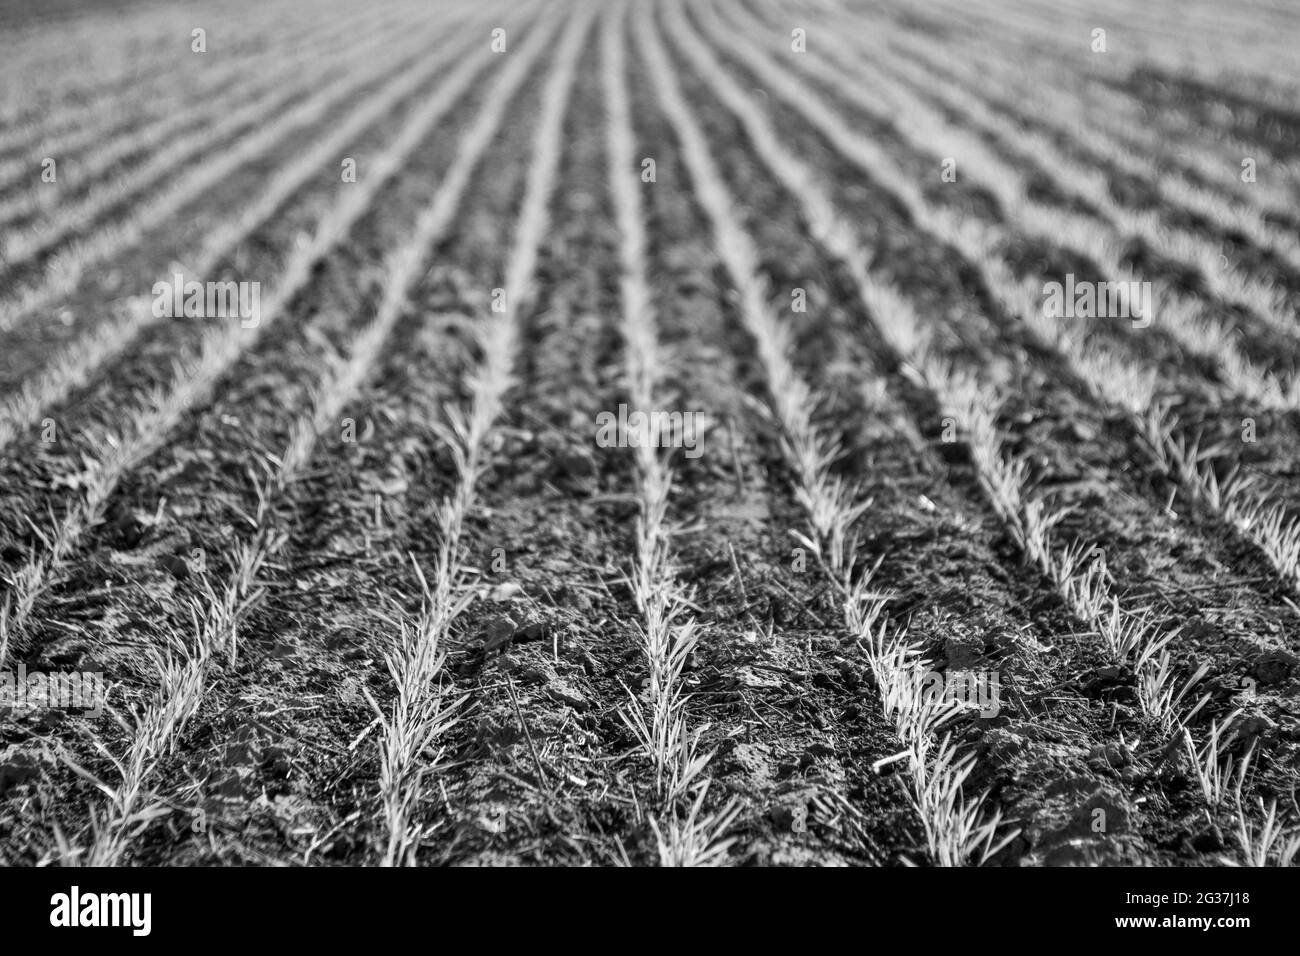 Sown field in the Argentine countryside, Pampas province, Patagonia, Argentina. Stock Photo